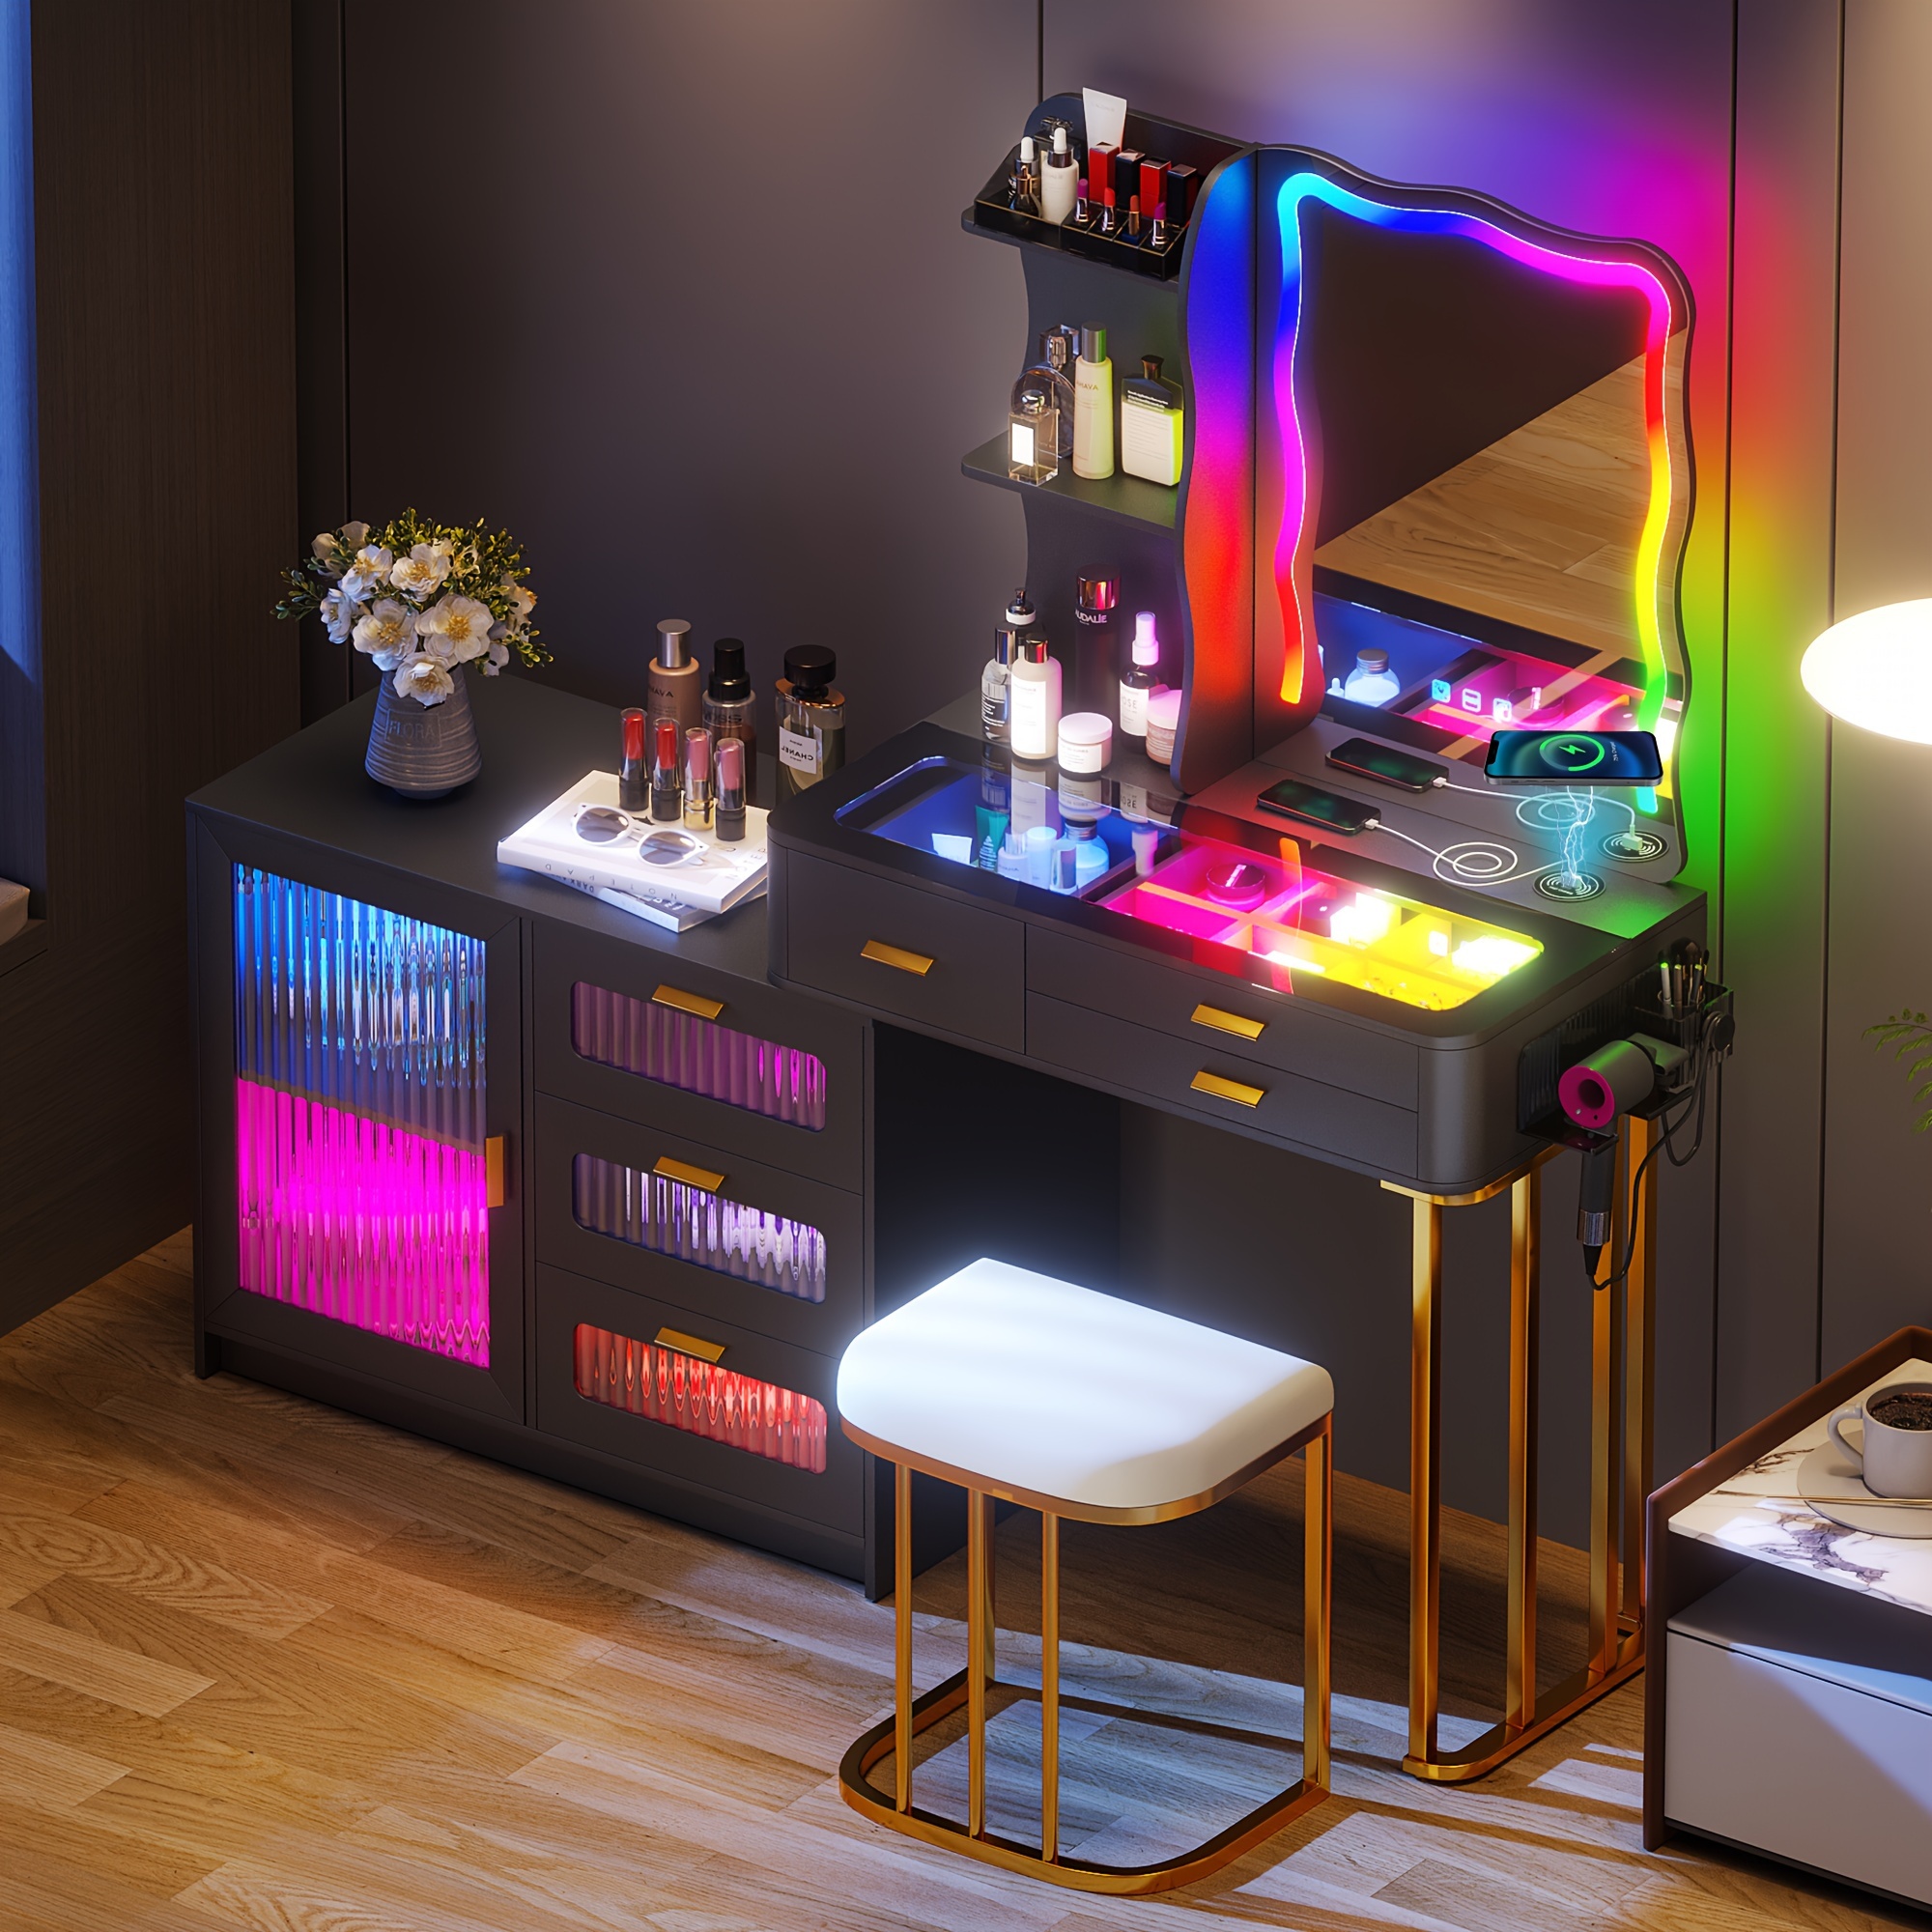 

Lvifur Rgb Makeup Vanity Desk With Lights, Glass Top Vanity Table With 24 Color Dimmable Lights, Large Vanity Set With 8 Drawers, Dressing Table With Cushioned Stool, Black